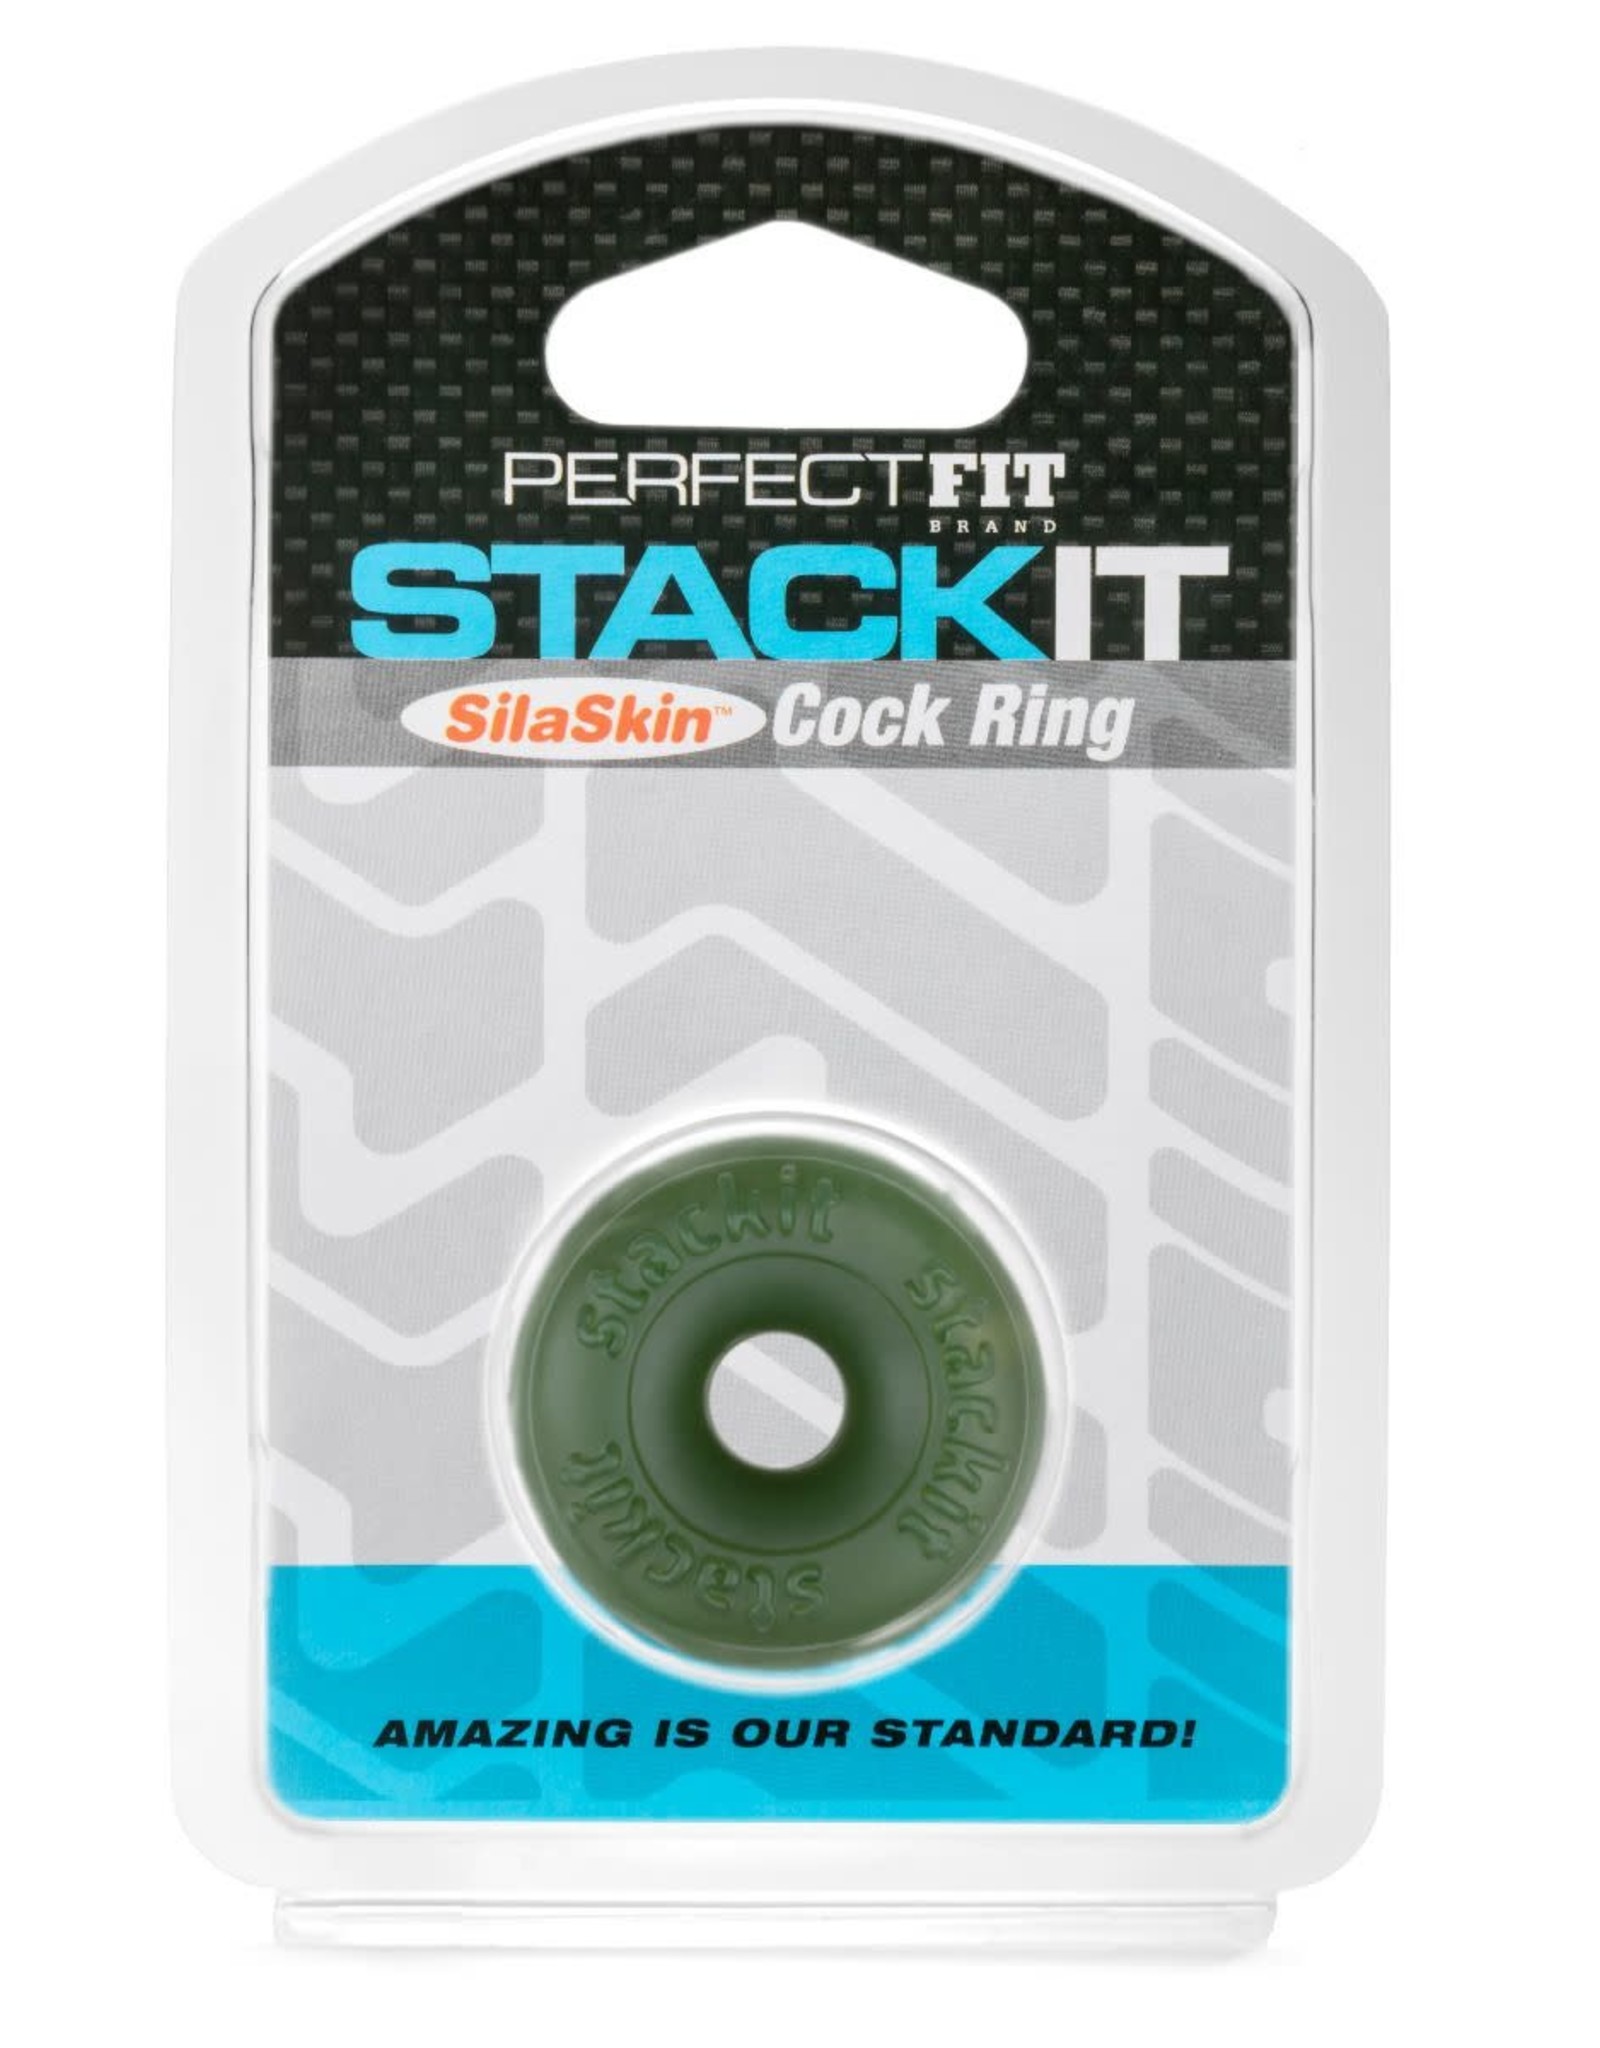 PerfectFit Stack it SilaSkin Cock Ring